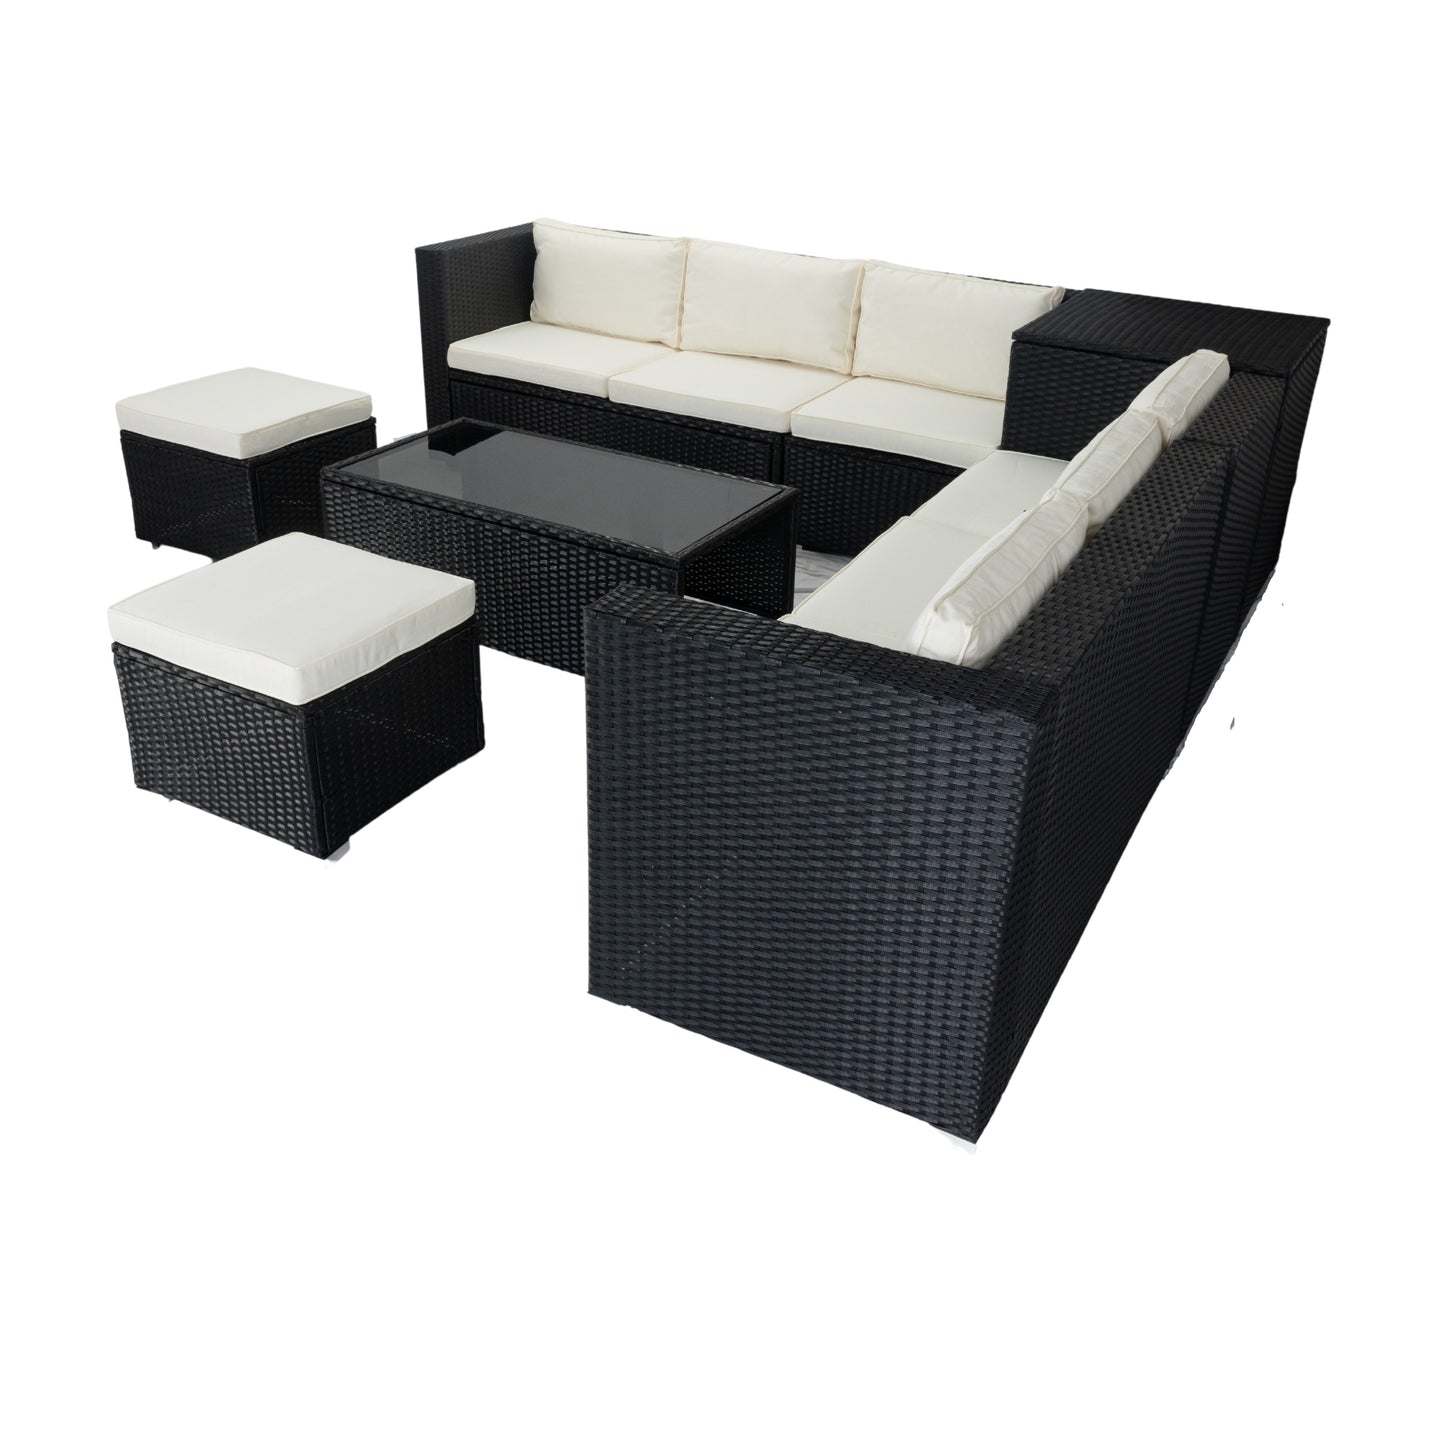 8 Piece Patio Sectional Wicker Rattan Outdoor Furniture Sofa Set with One Storage Box Under Seat and Cushion Box